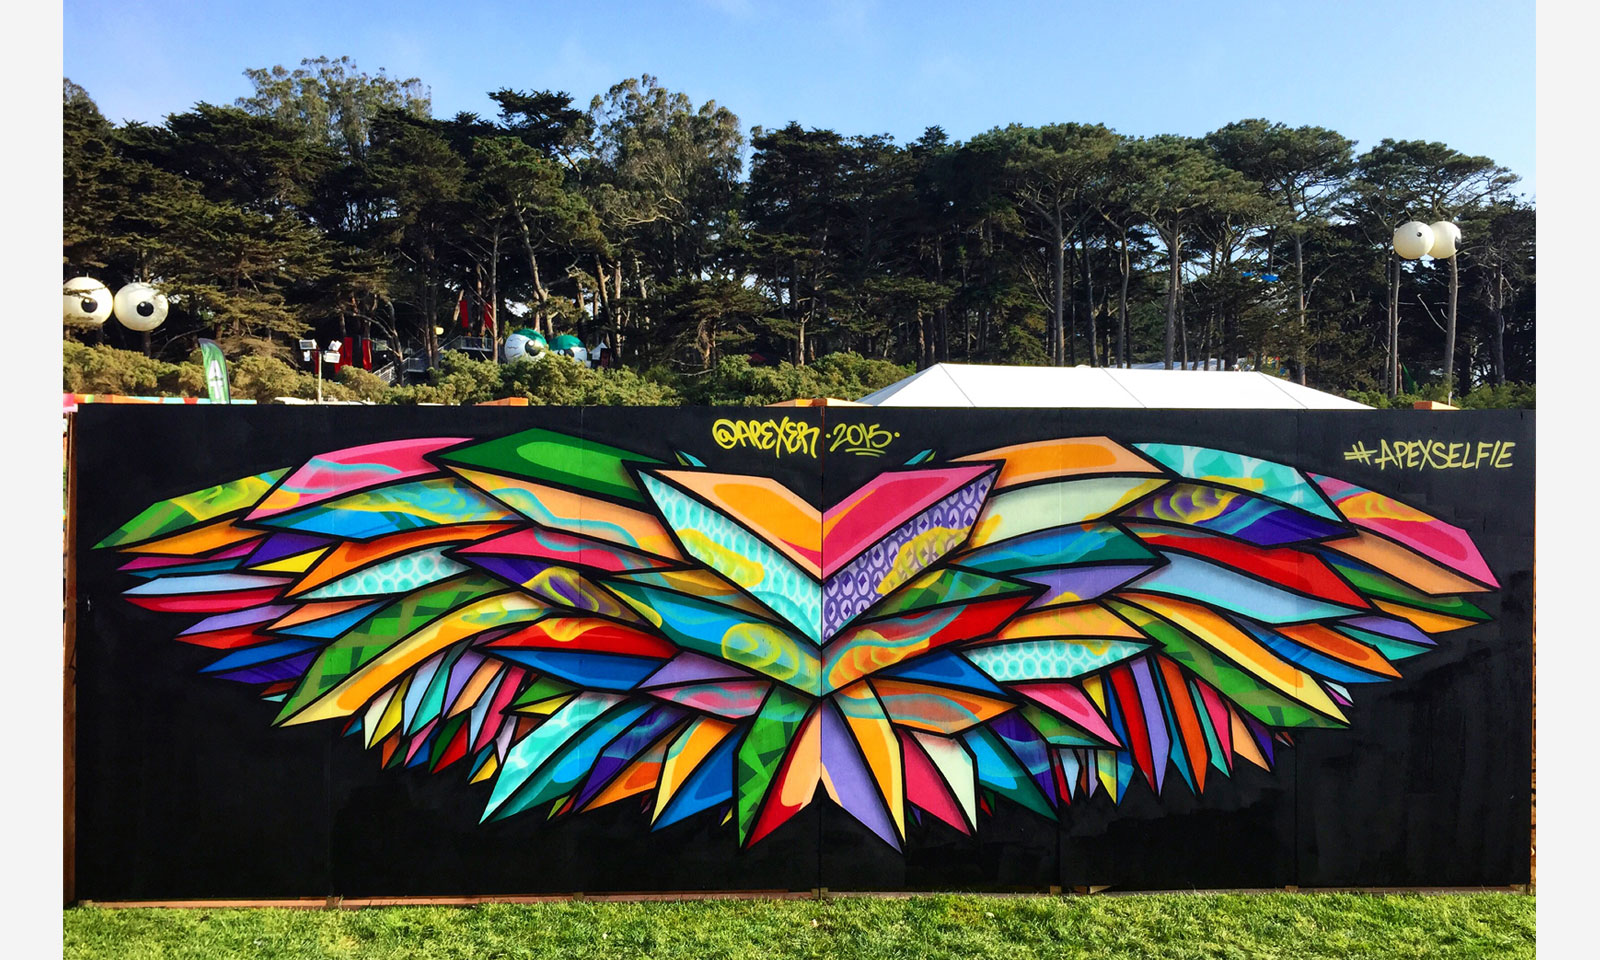 #ApexSelfie Mural at Outsidelands Music Festival in San Francisco, CA created by Apexer